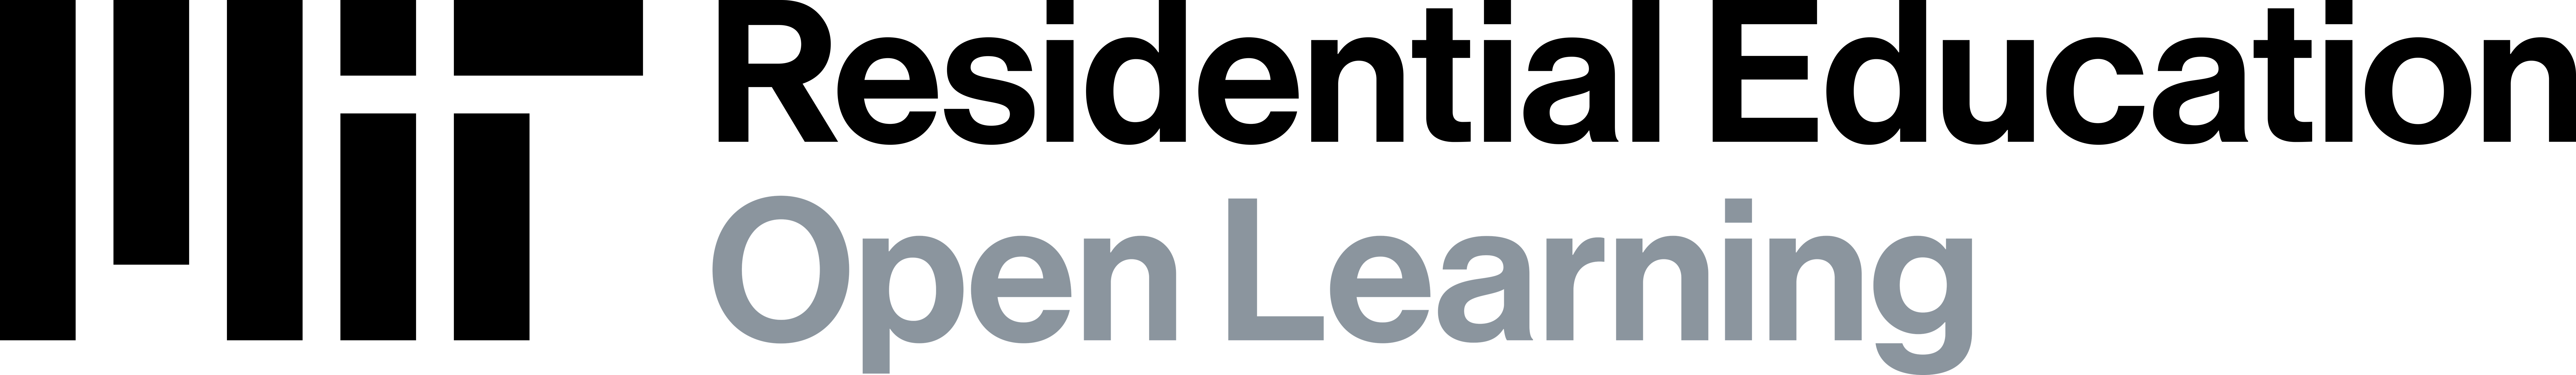 MIT Open Learning Residential Education text-based logo